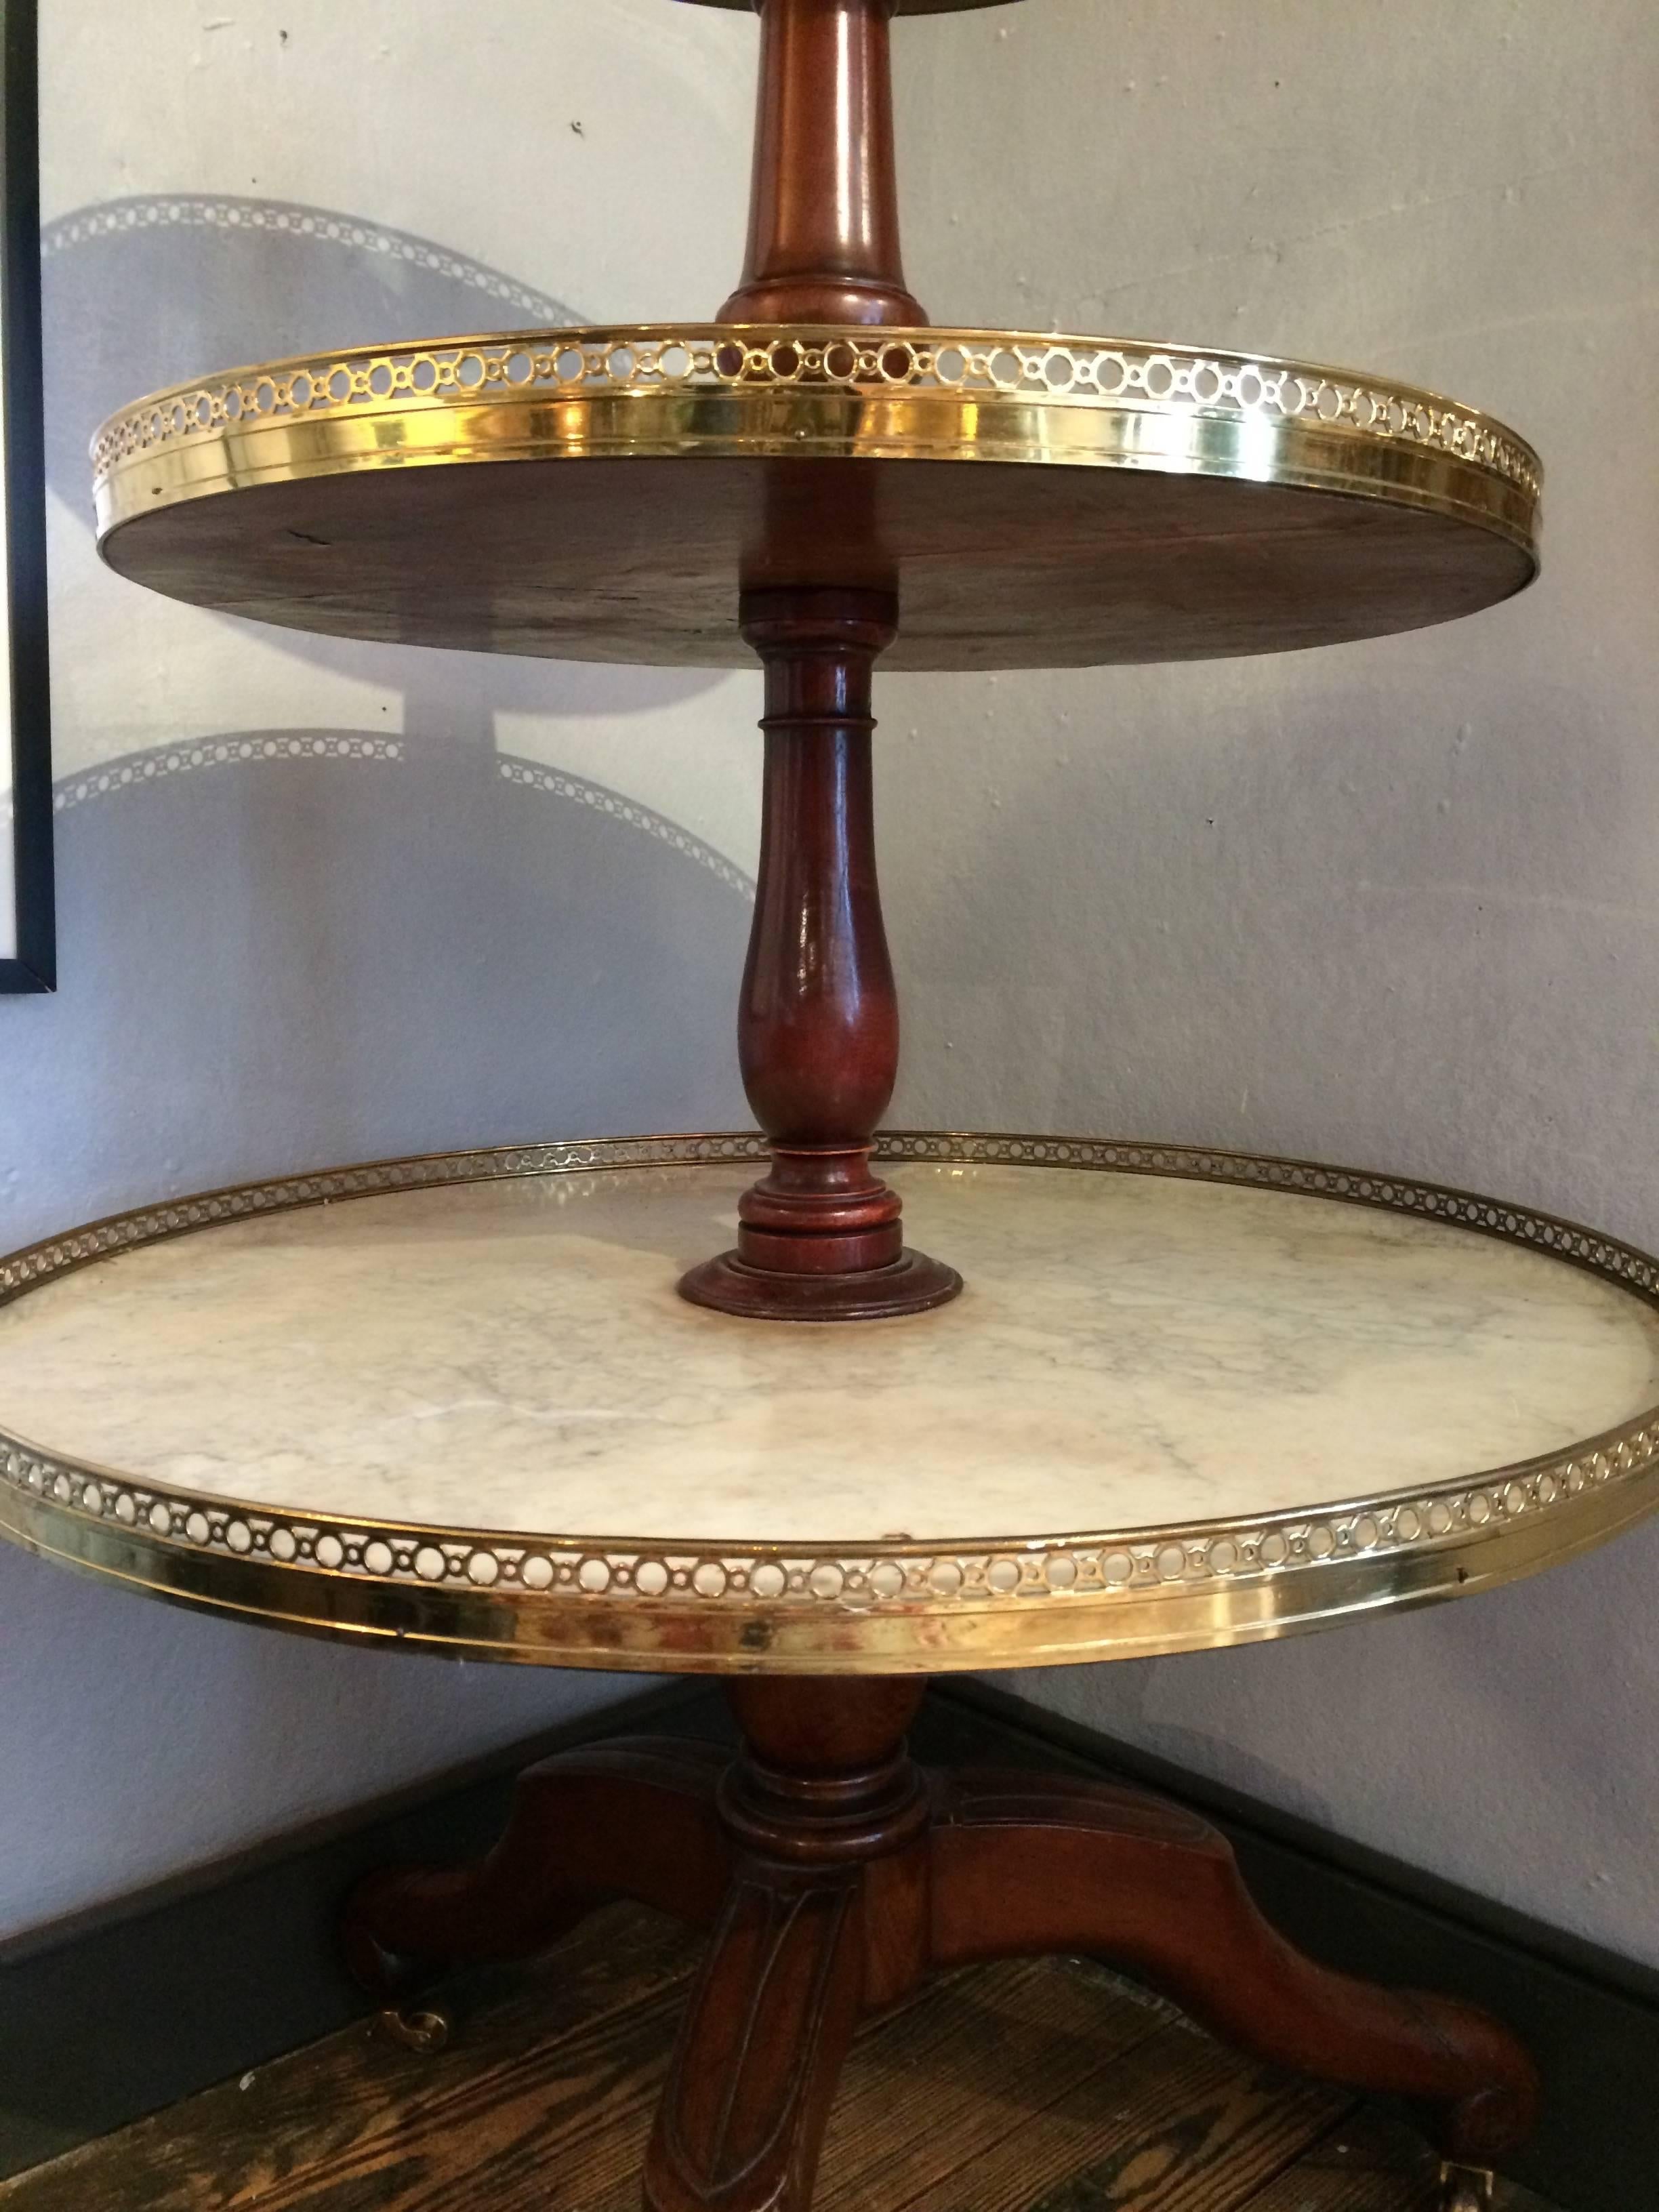 Very unusual and elegant English antique server having three-tier butler service. Each tier is a circular marble tray outlined in lovely polished brass galleries with a circle motiffe.
Bottom tray 32 diameter.
Middle tier 26 diameter.
Top 20